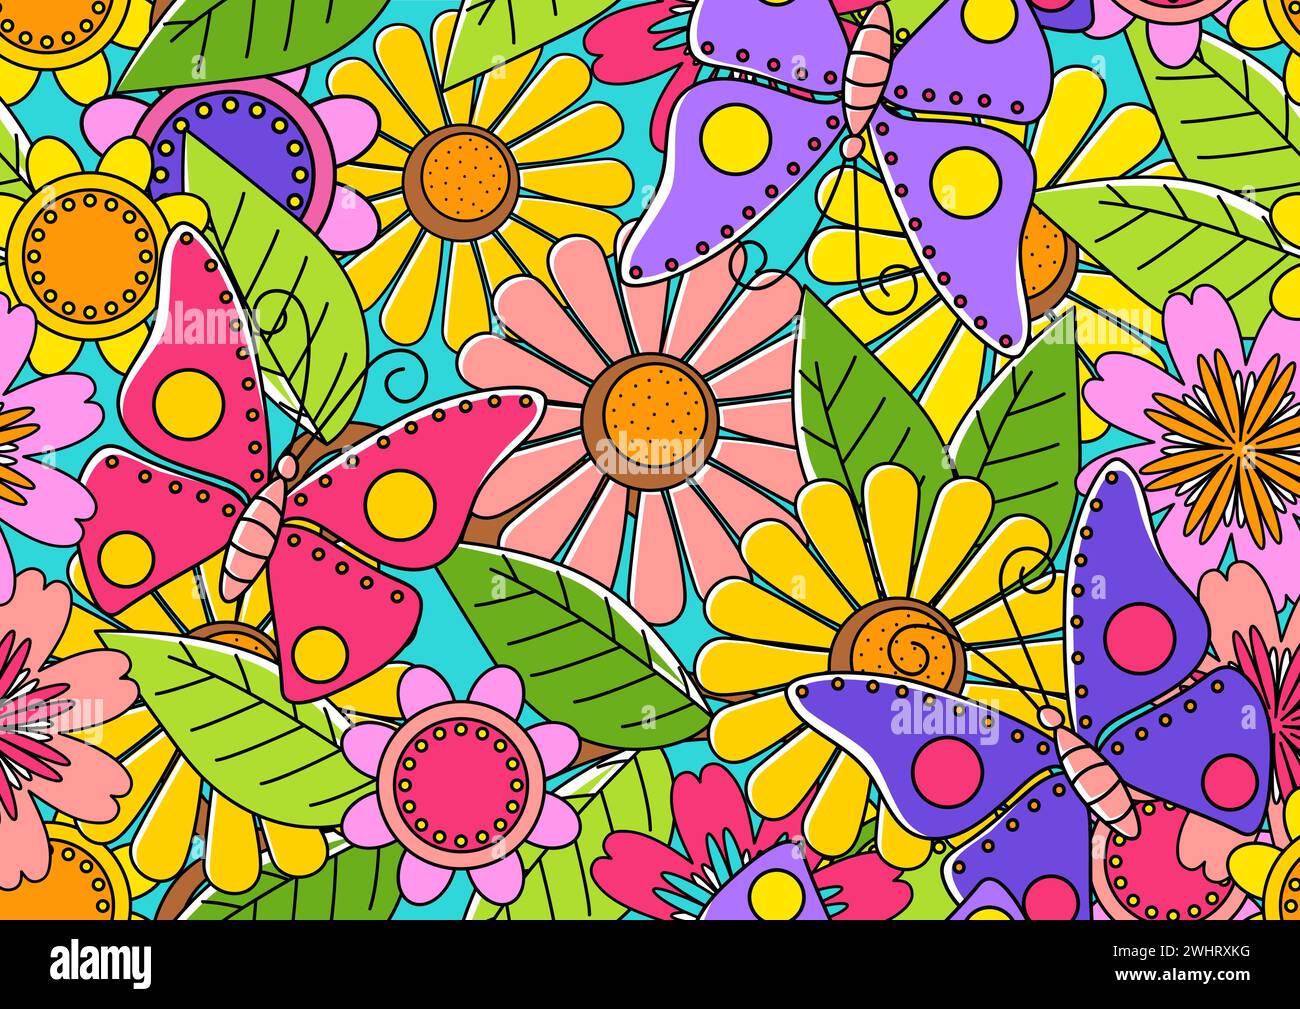 Mural doodle art of butterflies and flowers, vector illustration seamless pattern Stock Vector